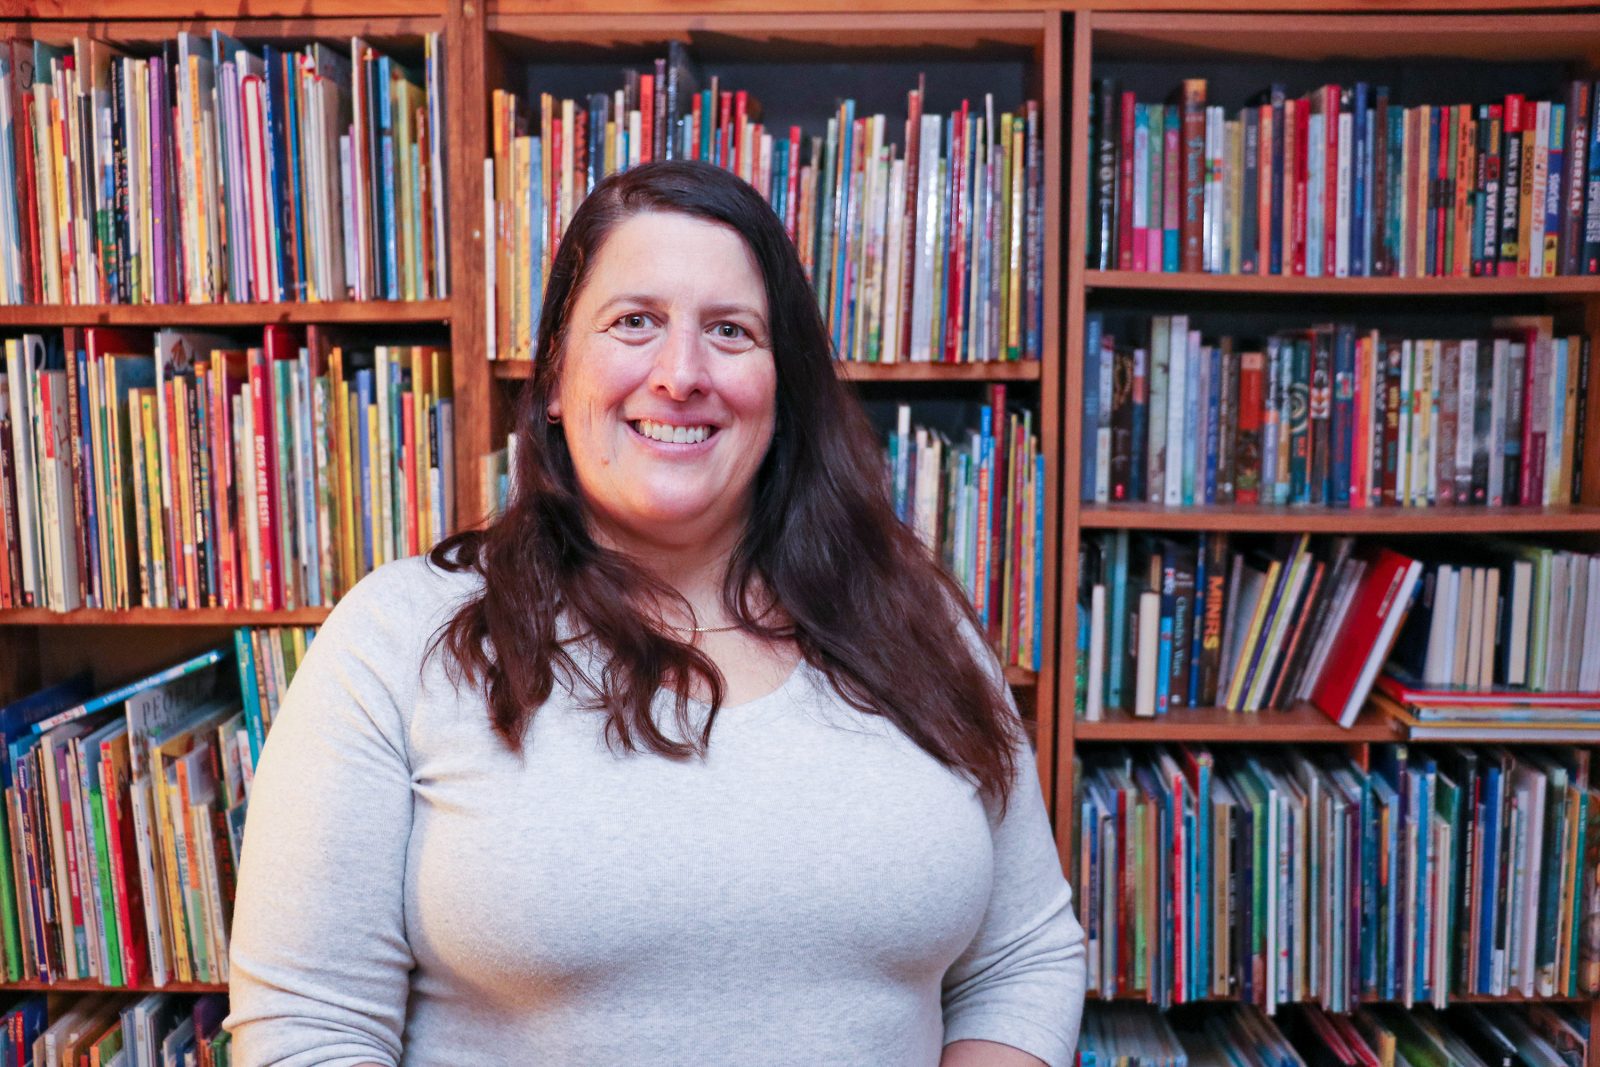 Brock University Professor Kari-Lynn Winters stands in front of several shelves filled with colourful children’s books.